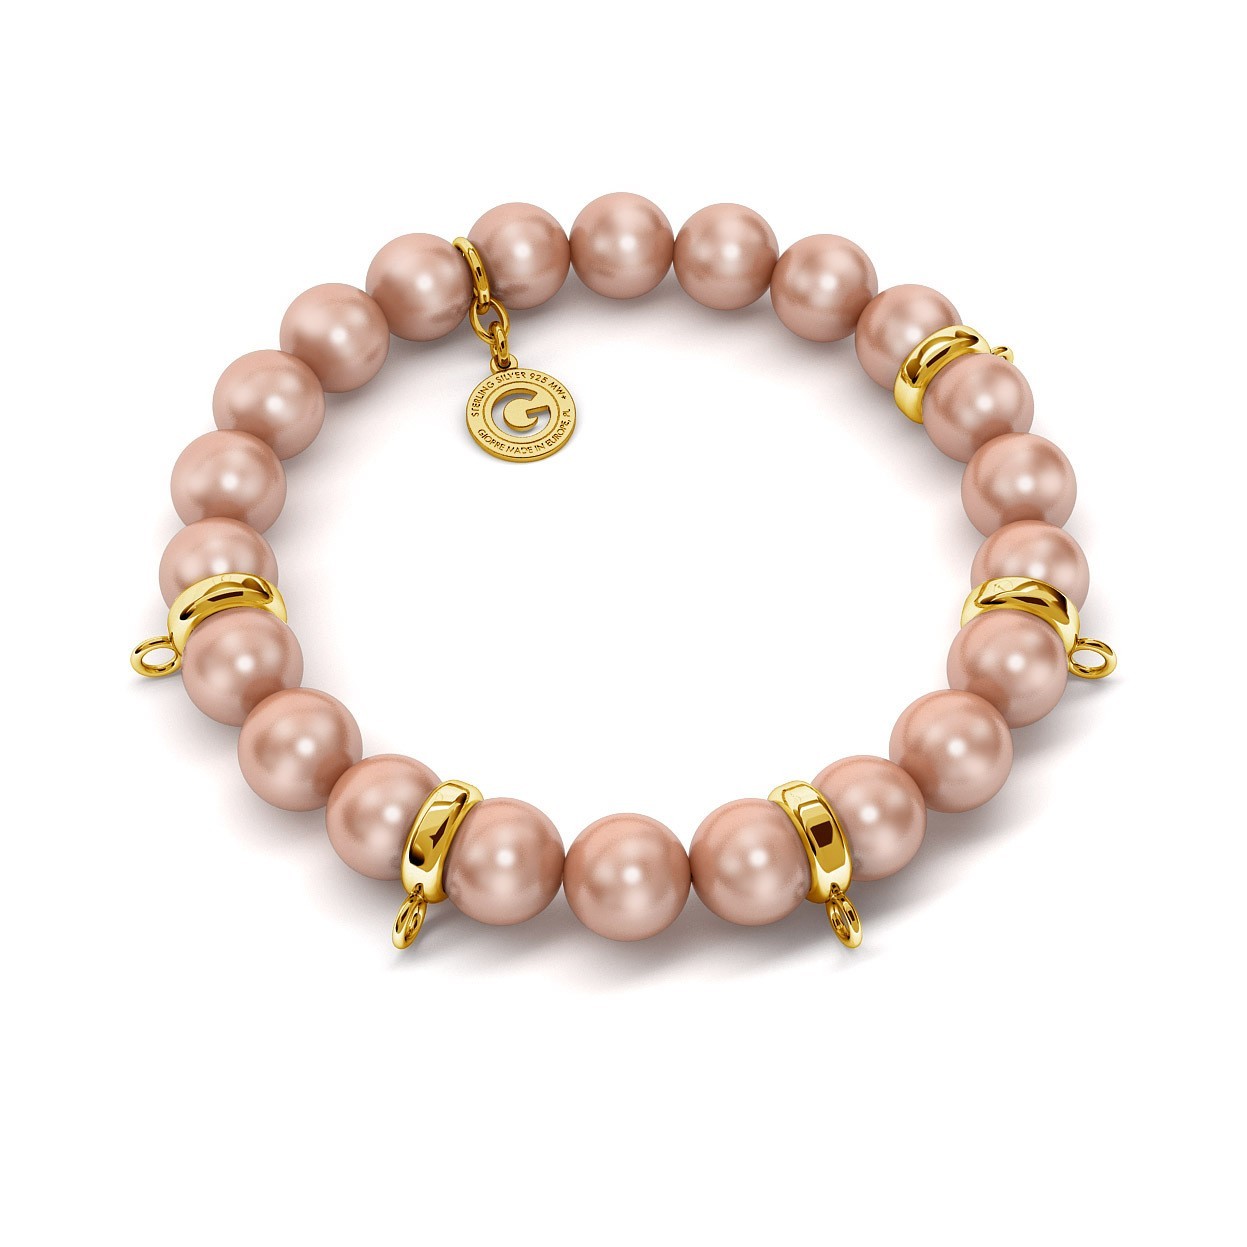 FLEXIBLE BRACELET WITH PEARLS (SWAROVSKI PEARL) FOR 5 CHARMS, SILVER 925, RHODIUM OR GOLD PLATED